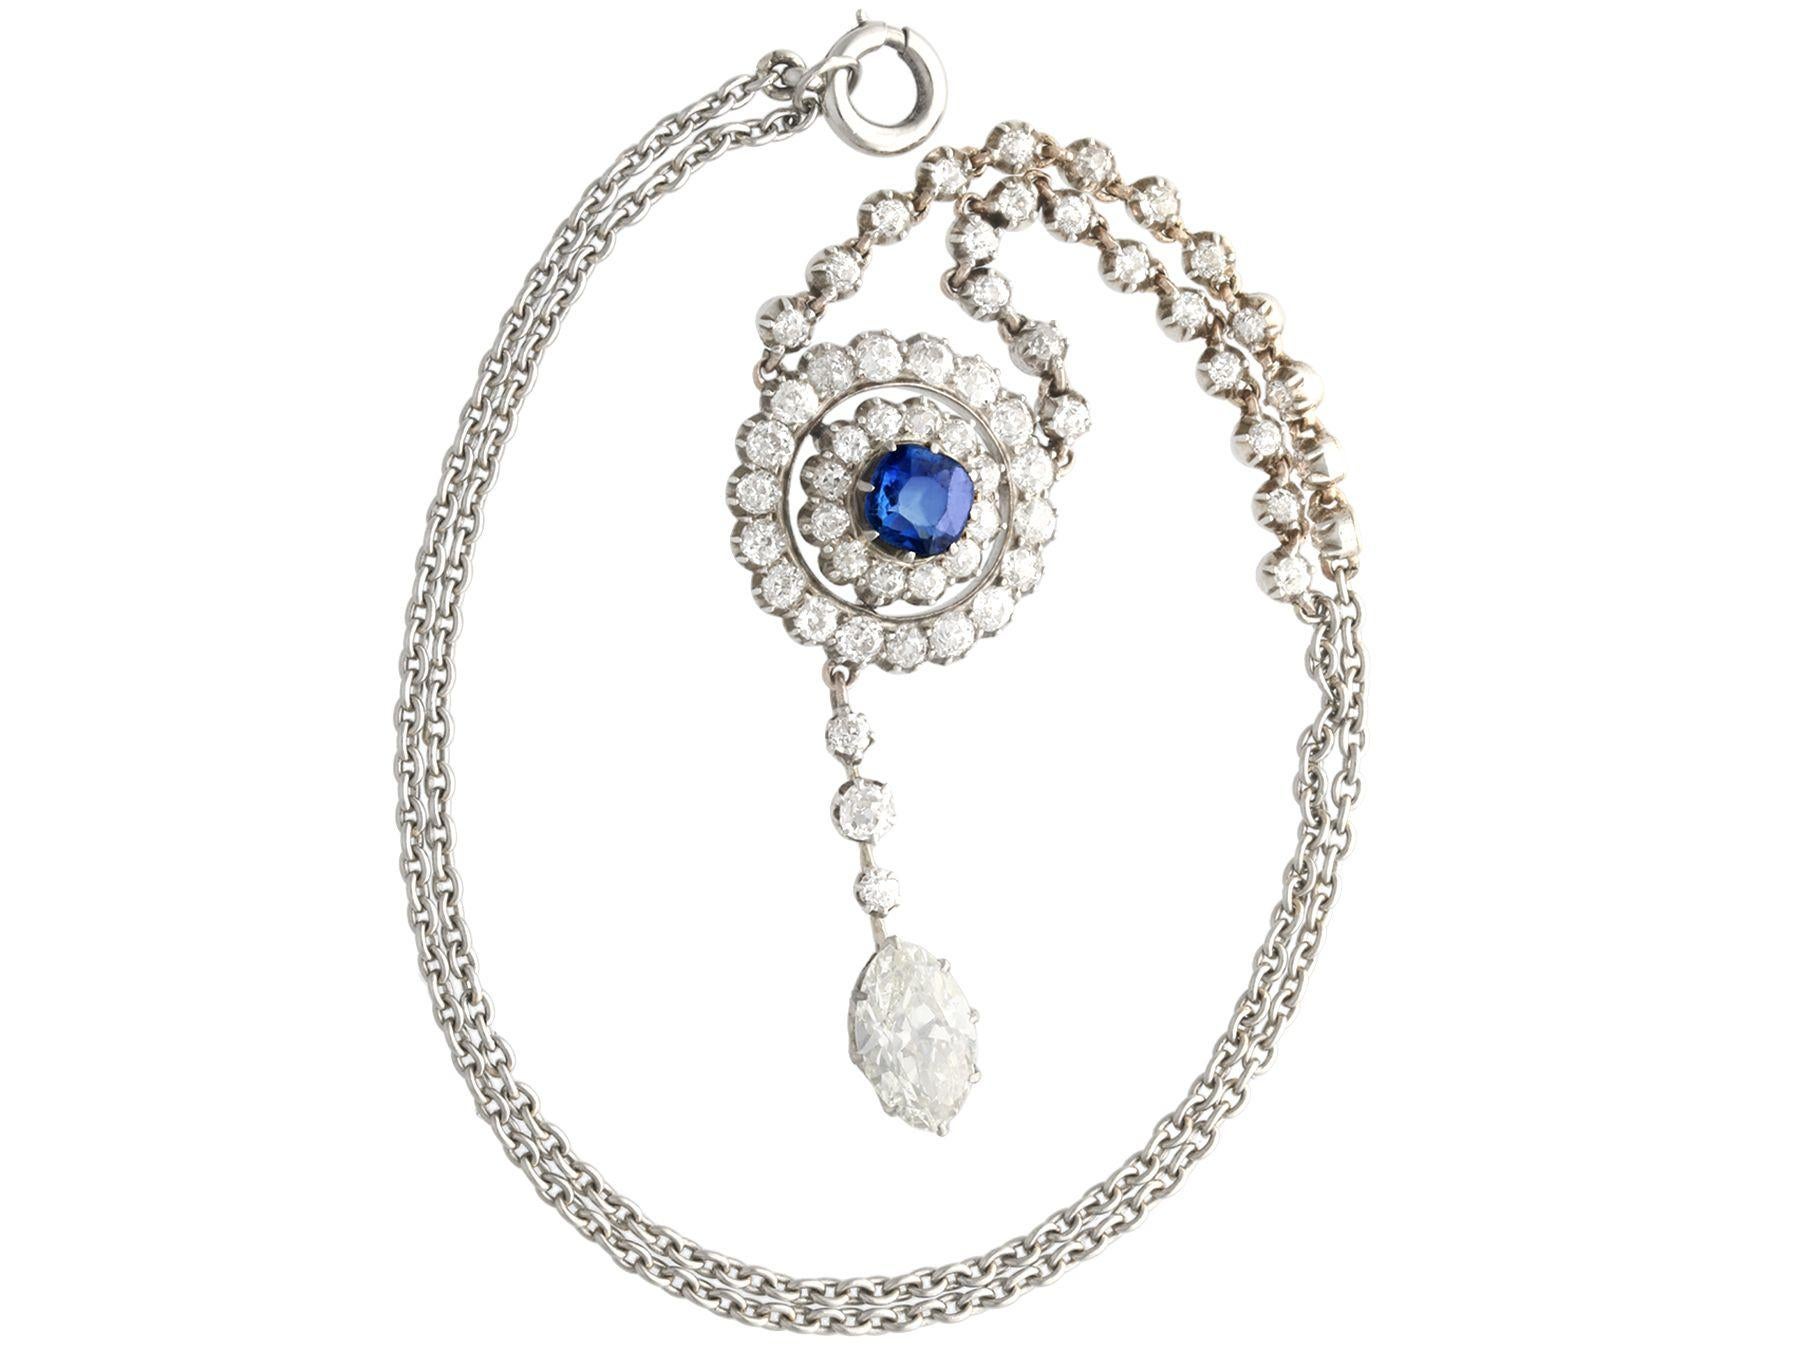 Art Deco Antique 1900s 3.69 Carat Diamond and Sapphire Gold and Silver Set Necklace